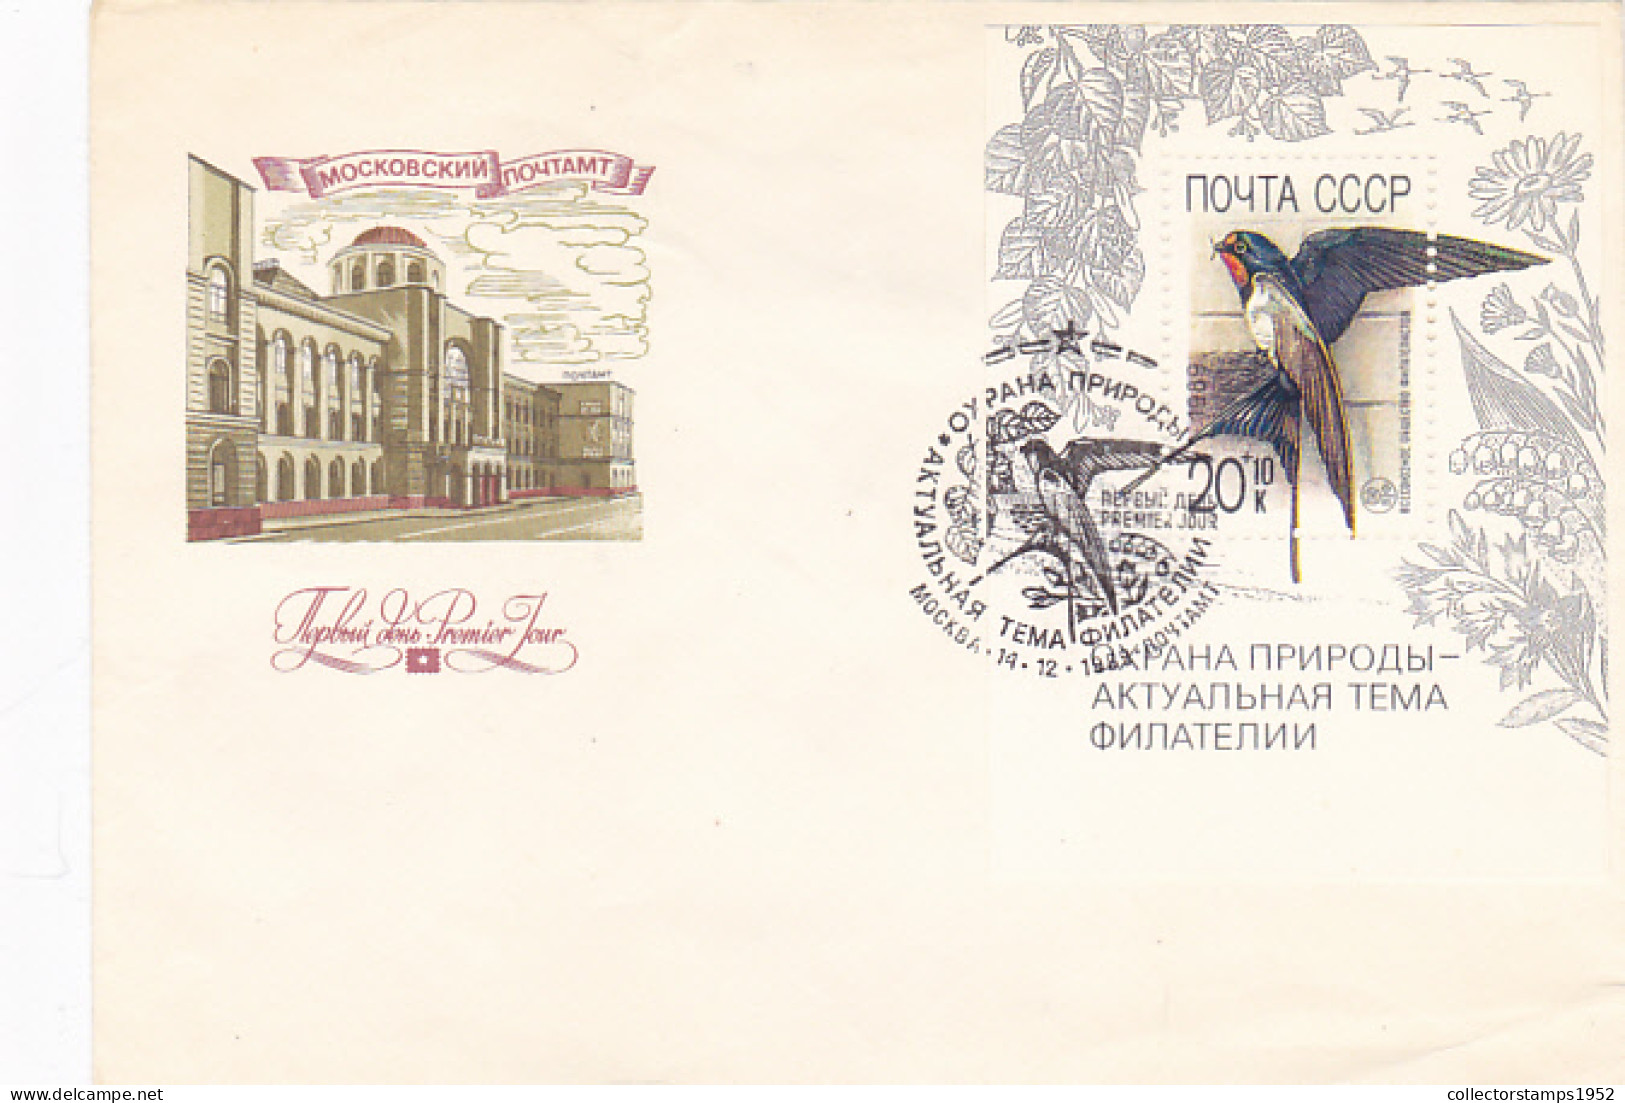 SWALLOW, BIRDS, ANIMALS, SPECIAL POSTMARK AND STAMP SHEET ON MOSCOW POST OFFICE COVER FDC, 1989, RUSSIA-USSR - Schwalben